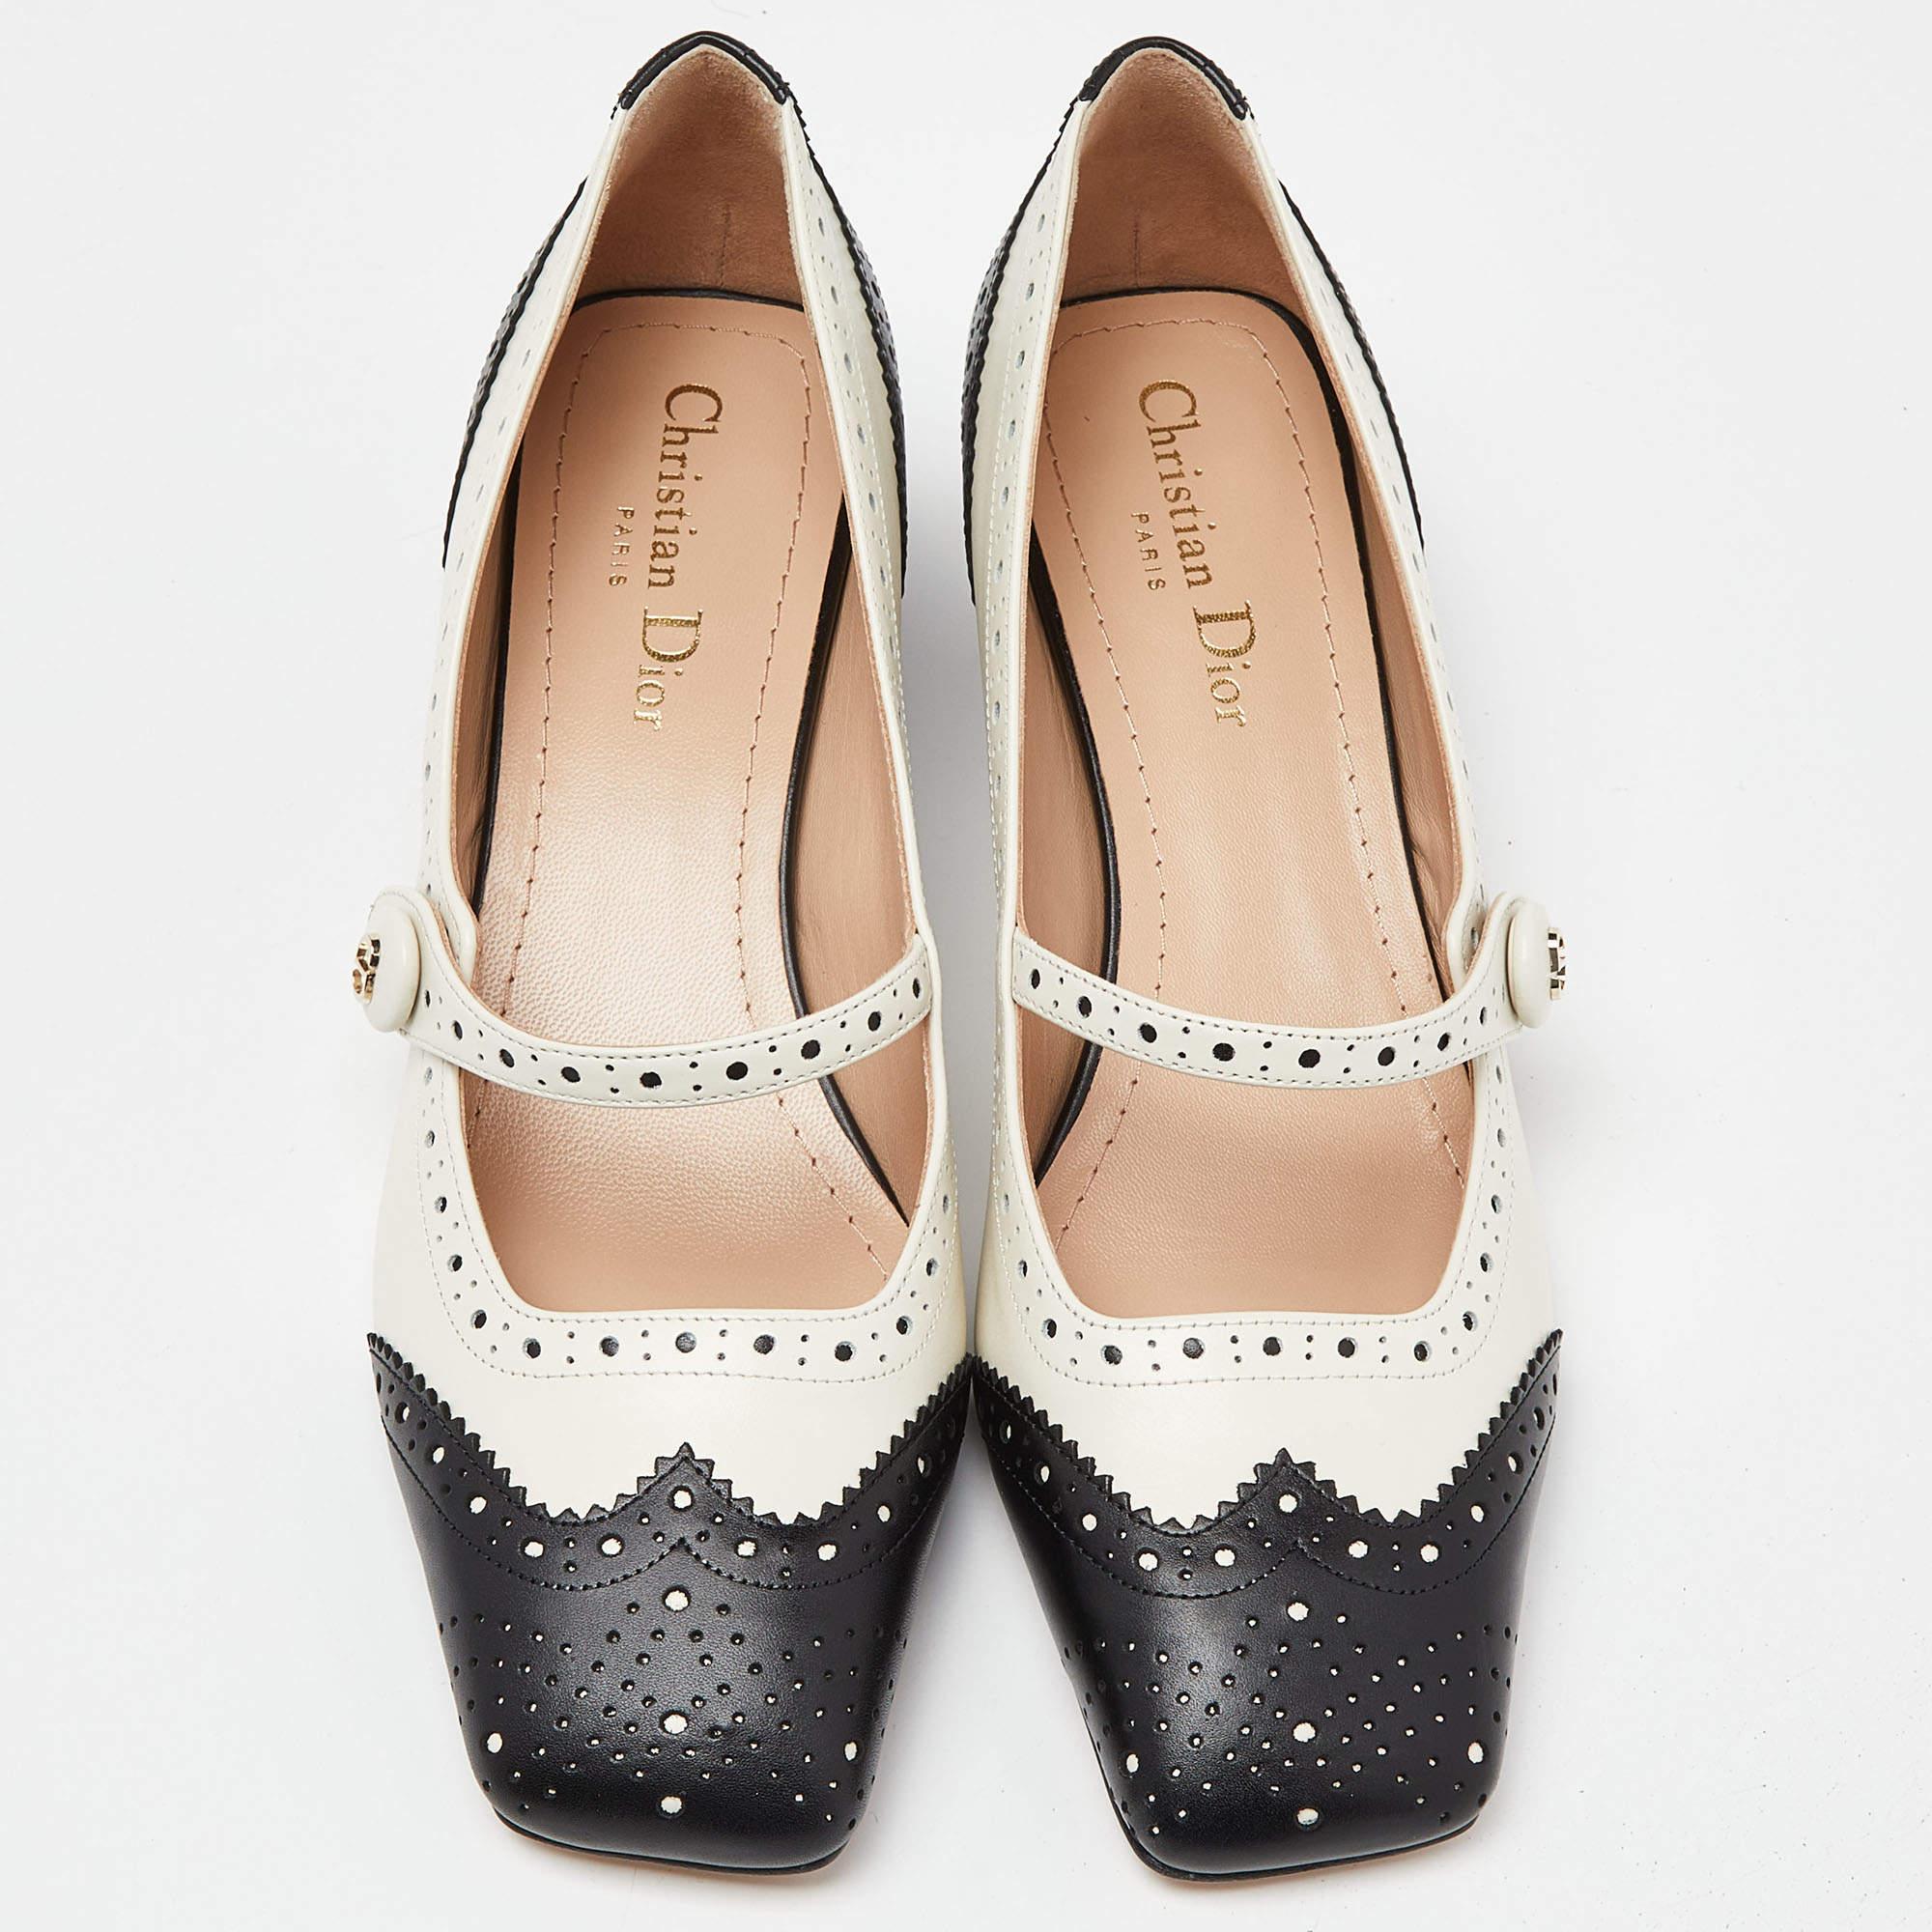 Elegant and sophisticated, the Dior pumps exude timeless charm. Crafted from luxurious leather, they boast a classic Mary Jane silhouette with a striking contrast of black and cream, epitomizing chic femininity with every step.

Includes
Original